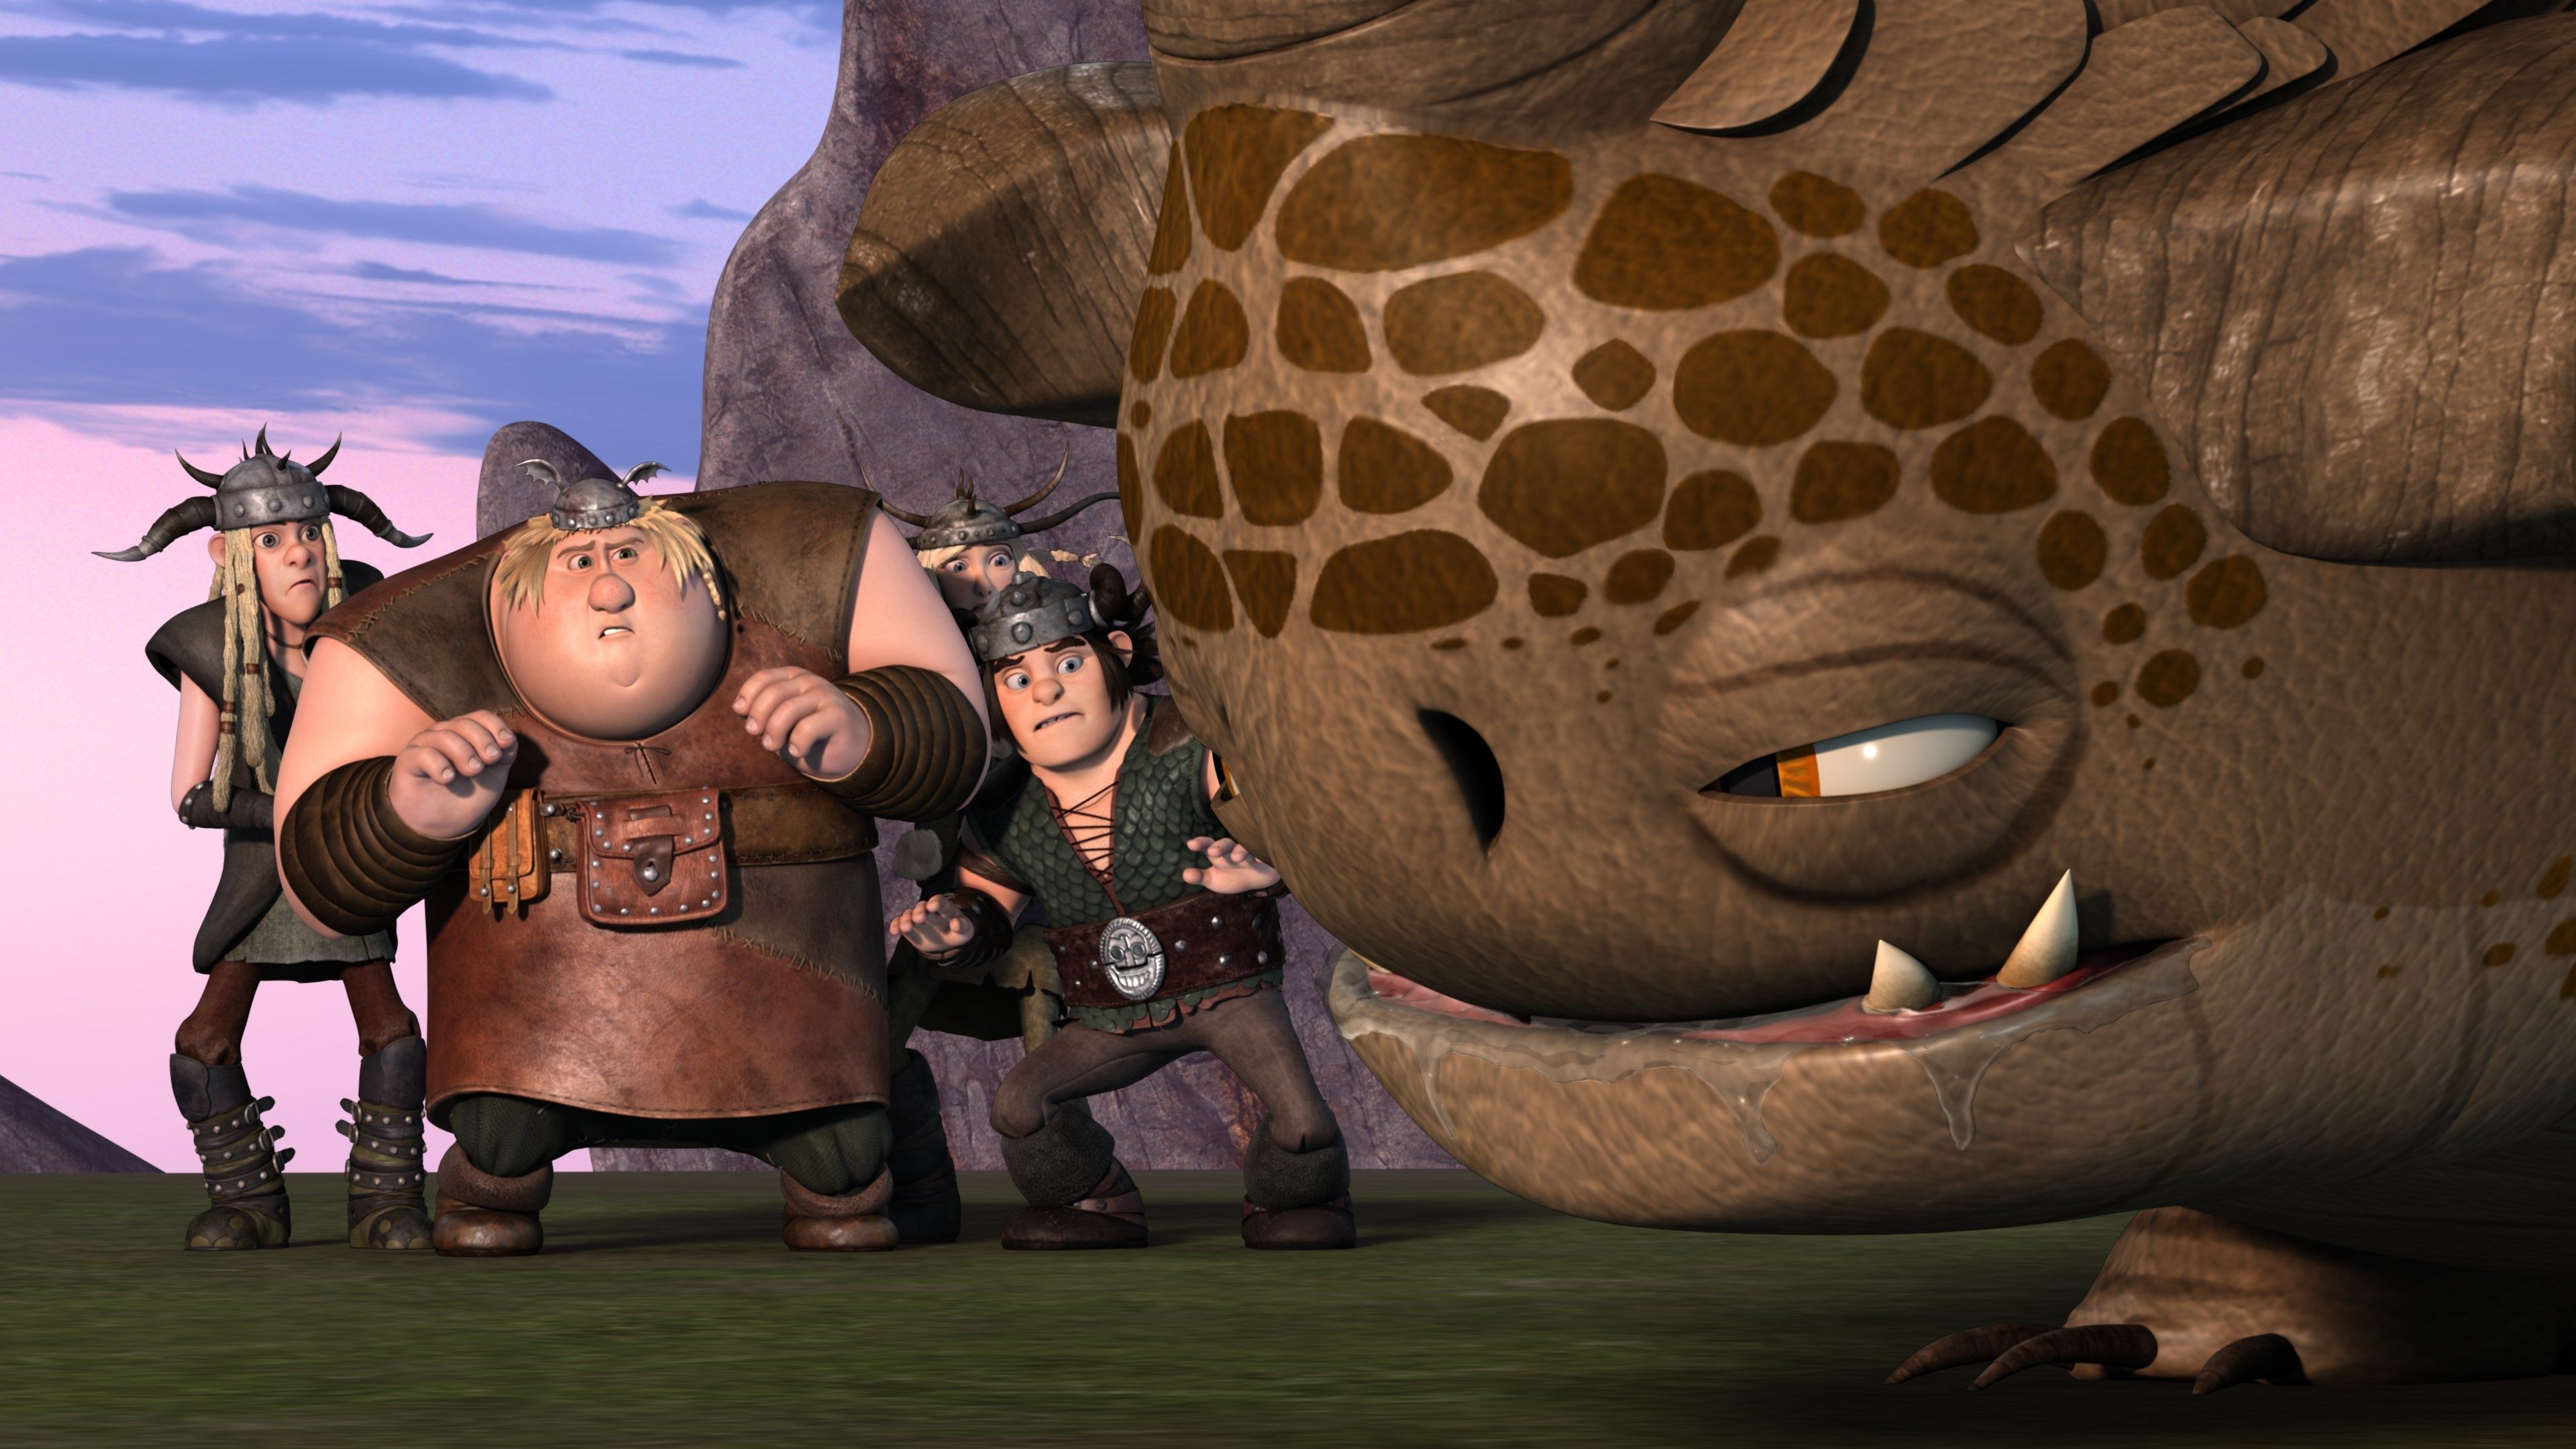 DreamWorks: How to train your dragon, Computer-animated action fantasy film, 2010. 3840x2160 4K Wallpaper.